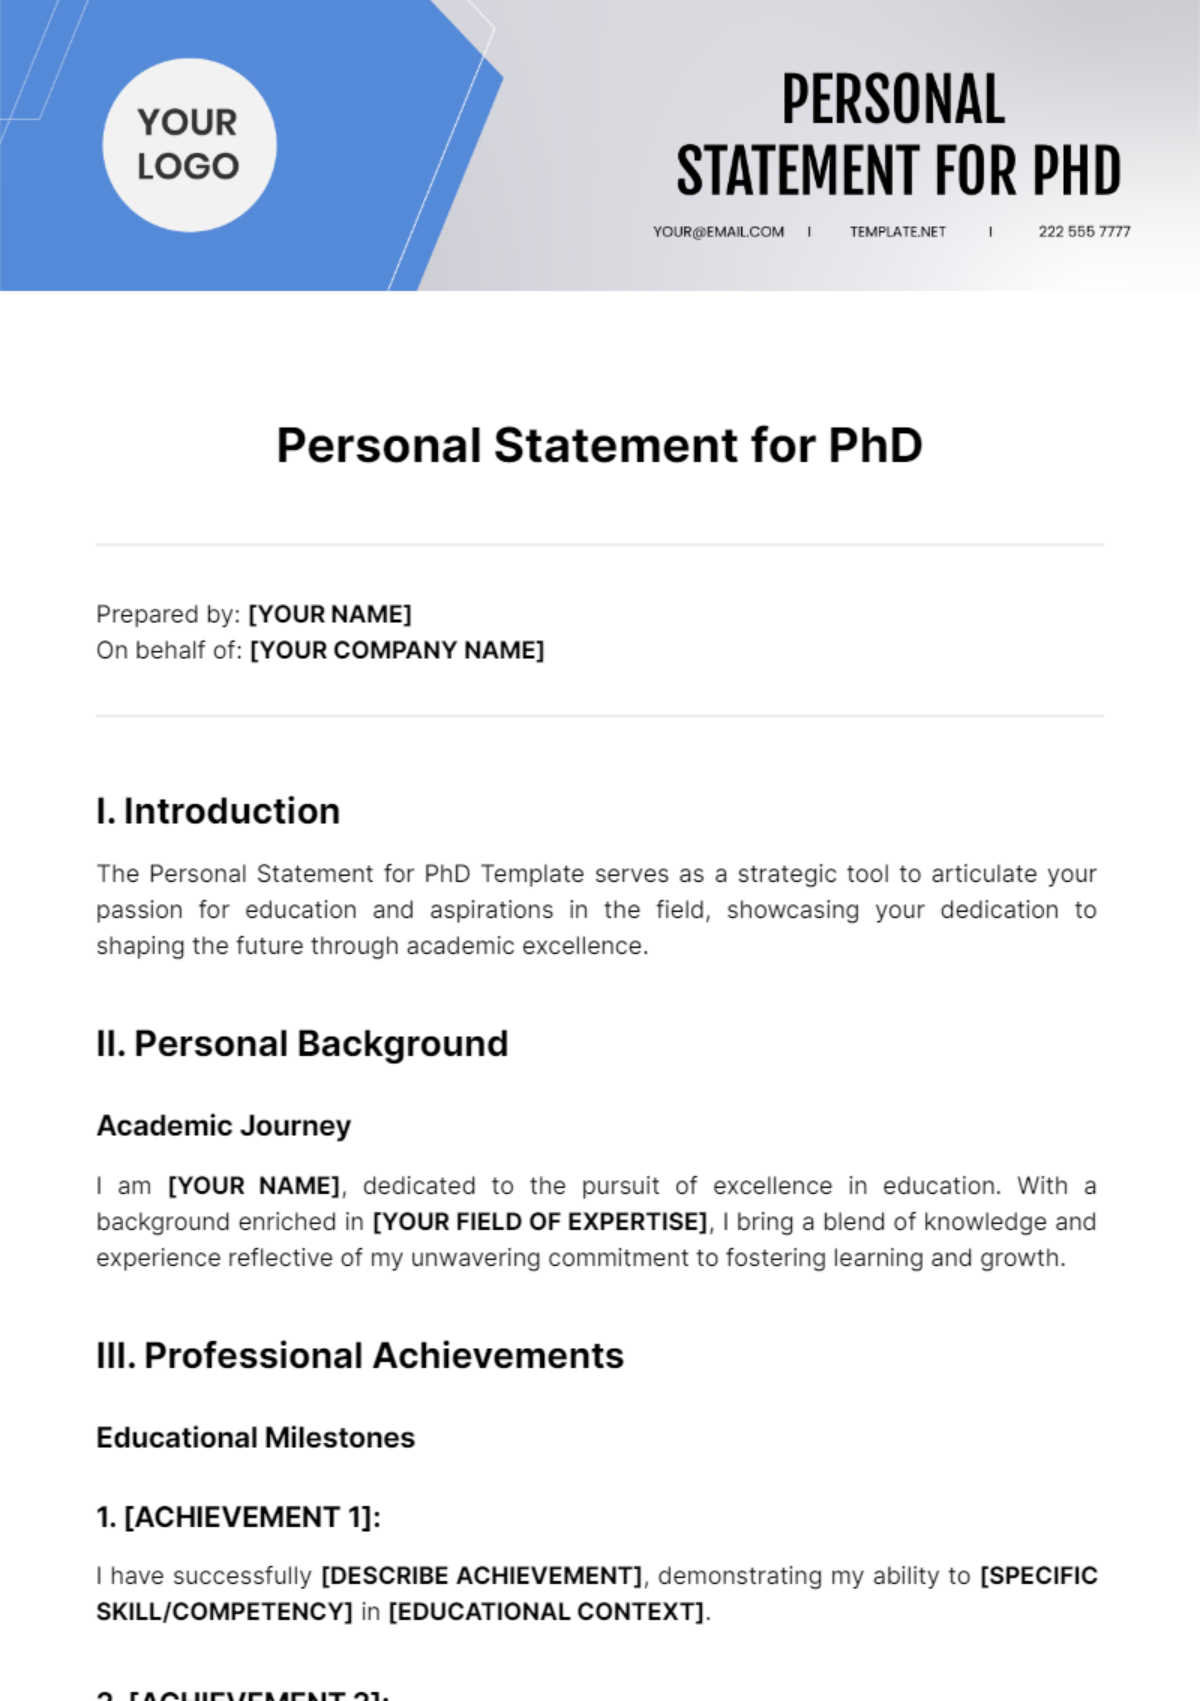 Personal Statement for PhD Template